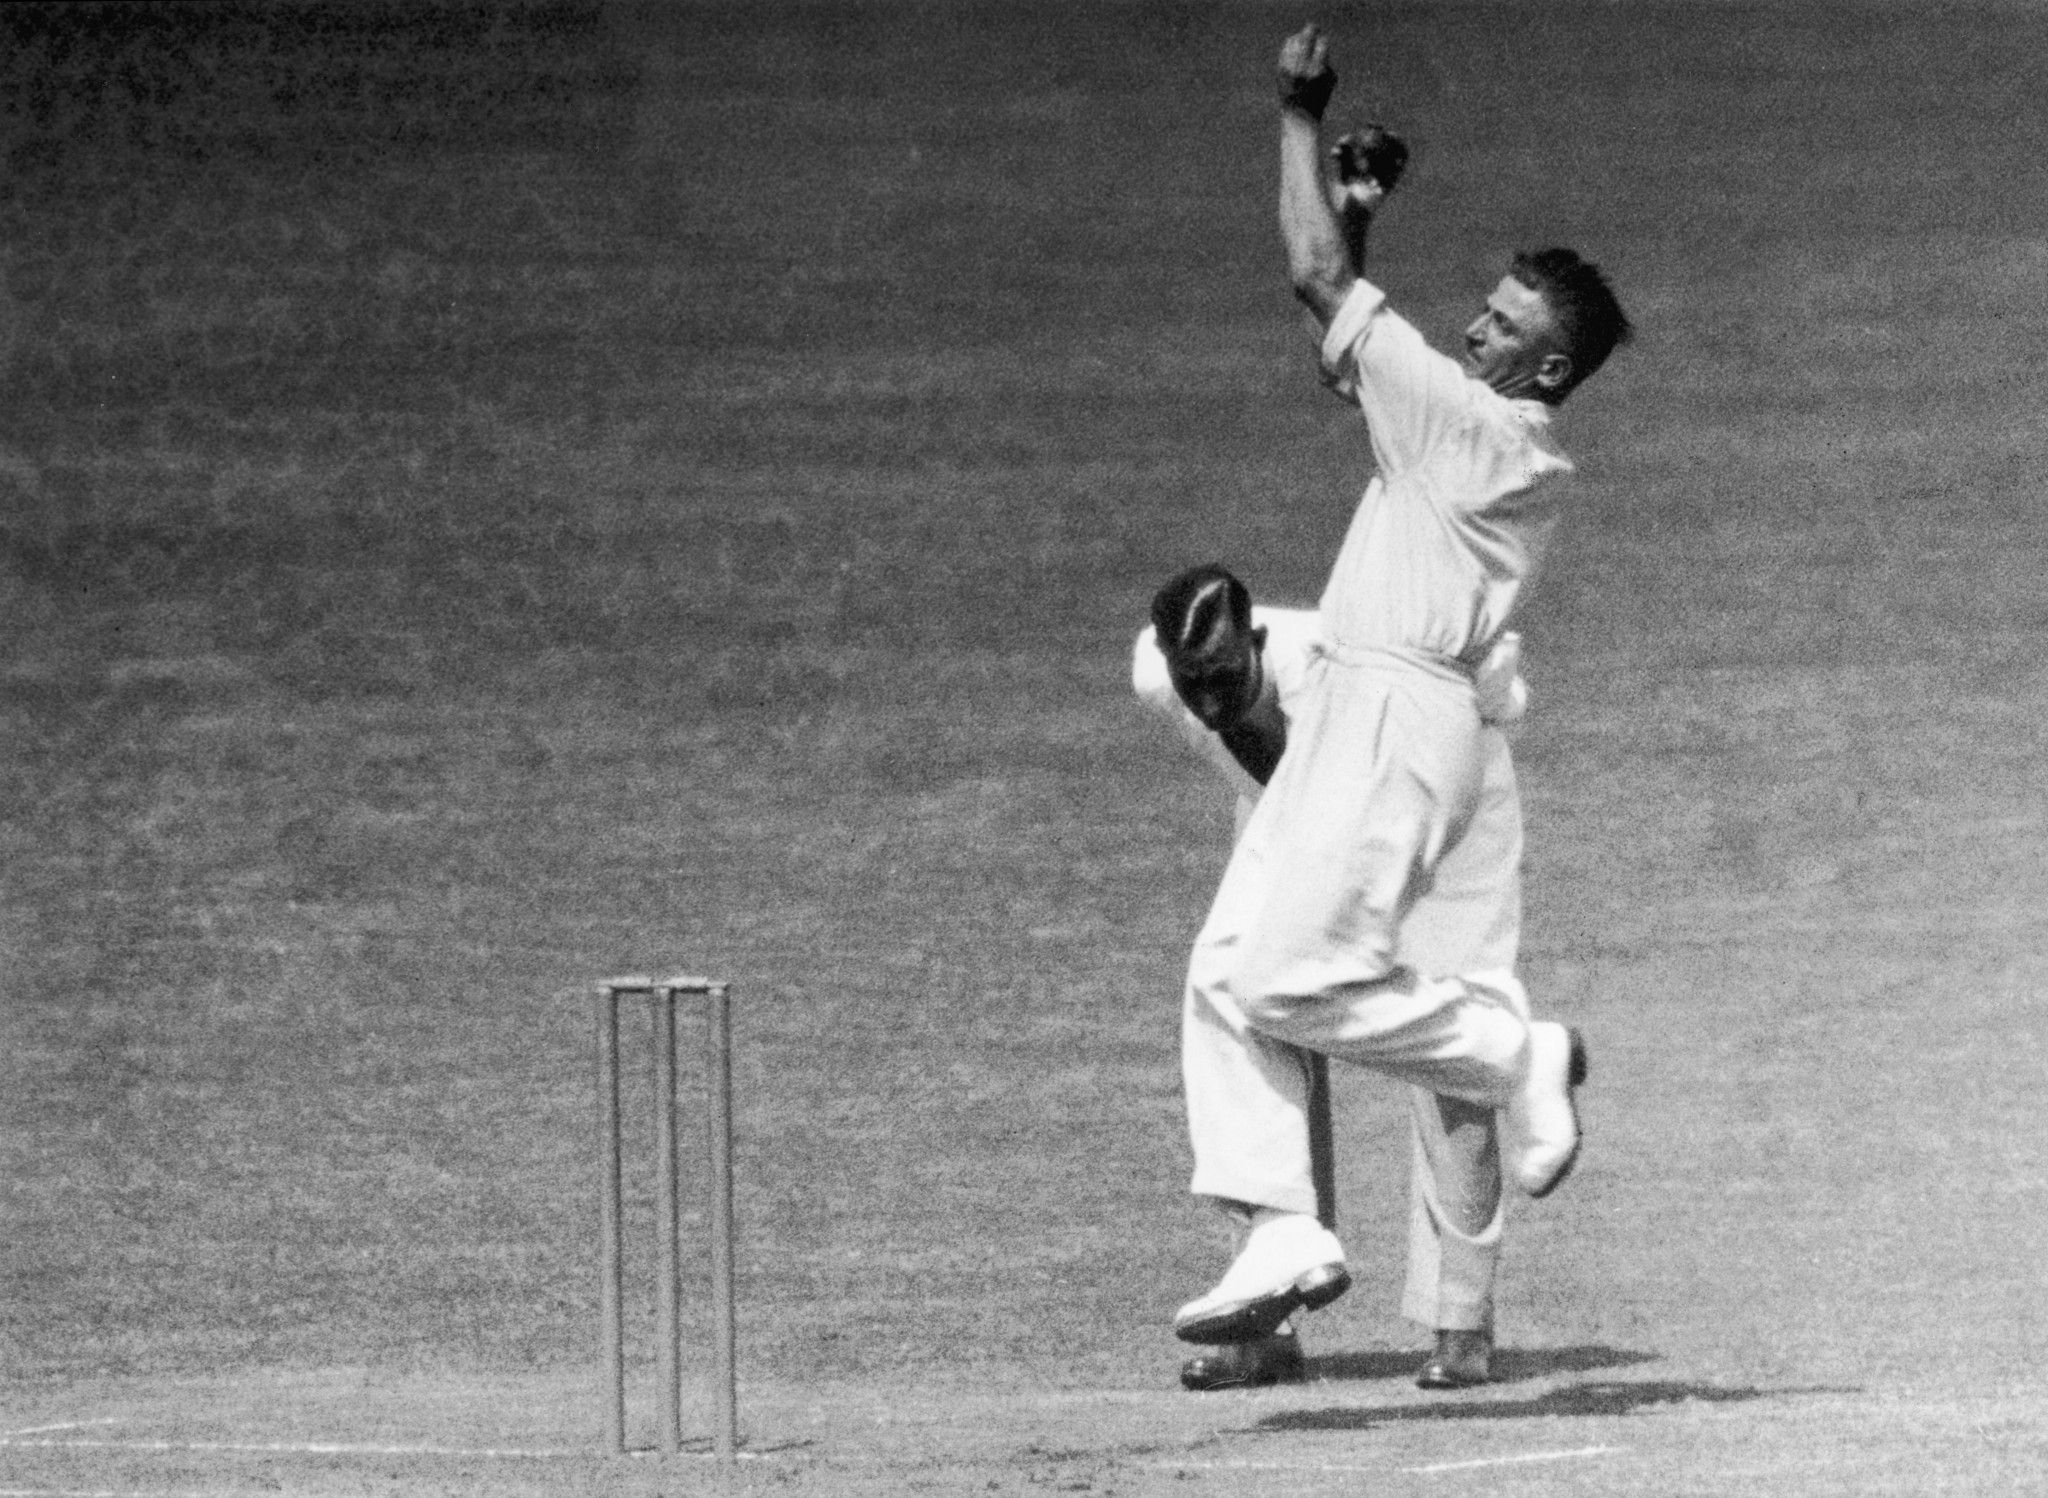 Harold Larwood was one of the fastest bowlers of all time and a key figure in the infamous Bodyline series of 1932-1933 ©Getty Images